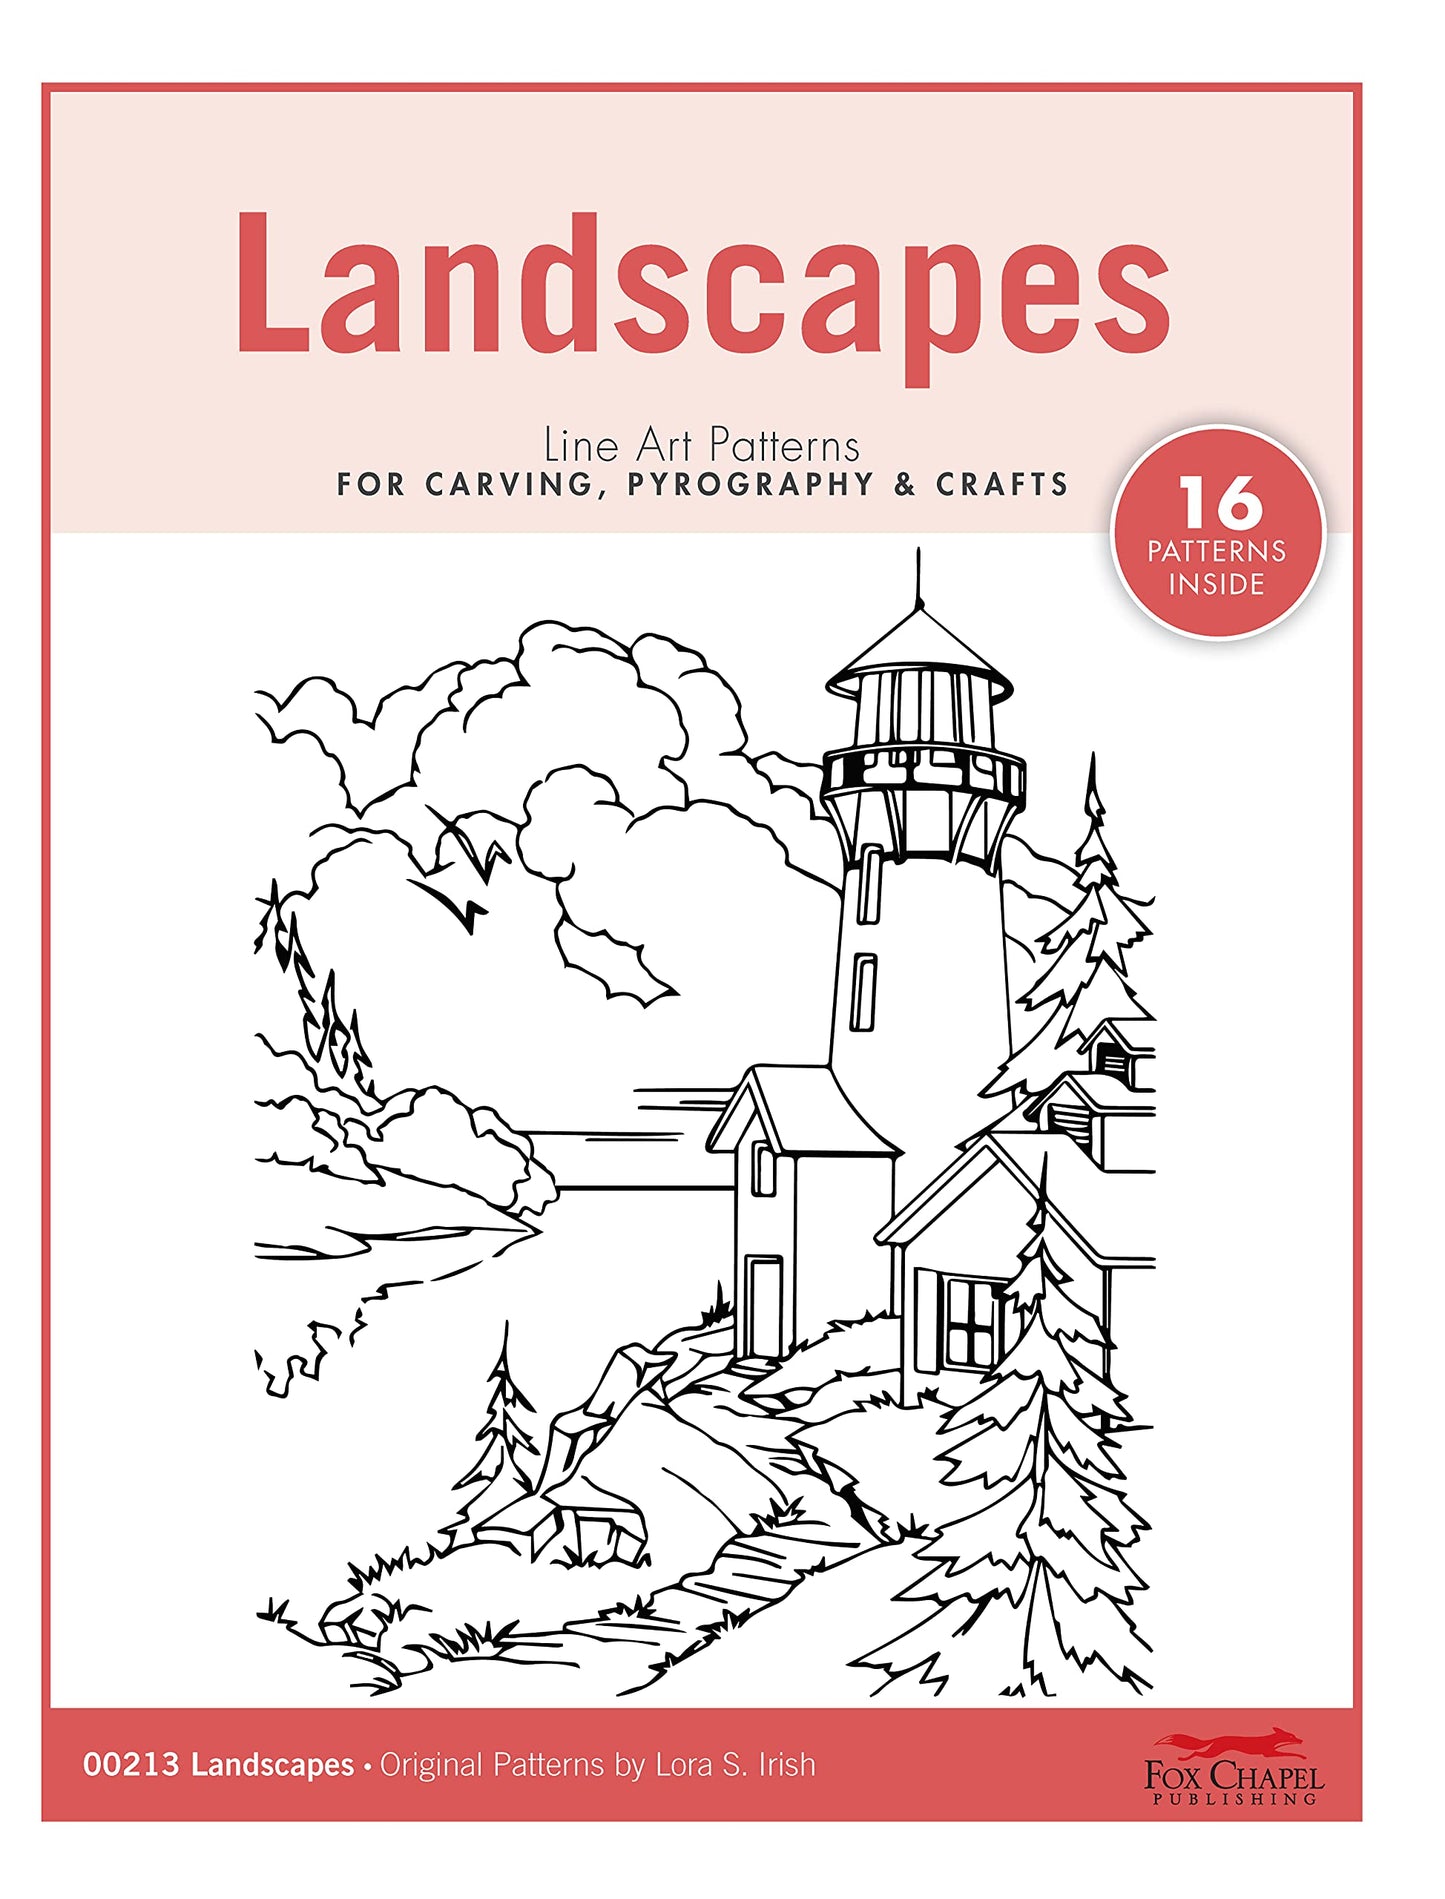 Landscapes Line Art Patterns for Carving, Pyrography & Crafts (Fox Chapel Publishing) 16 Original Designs by Lora Irish of Lighthouses, Barns, Farms,